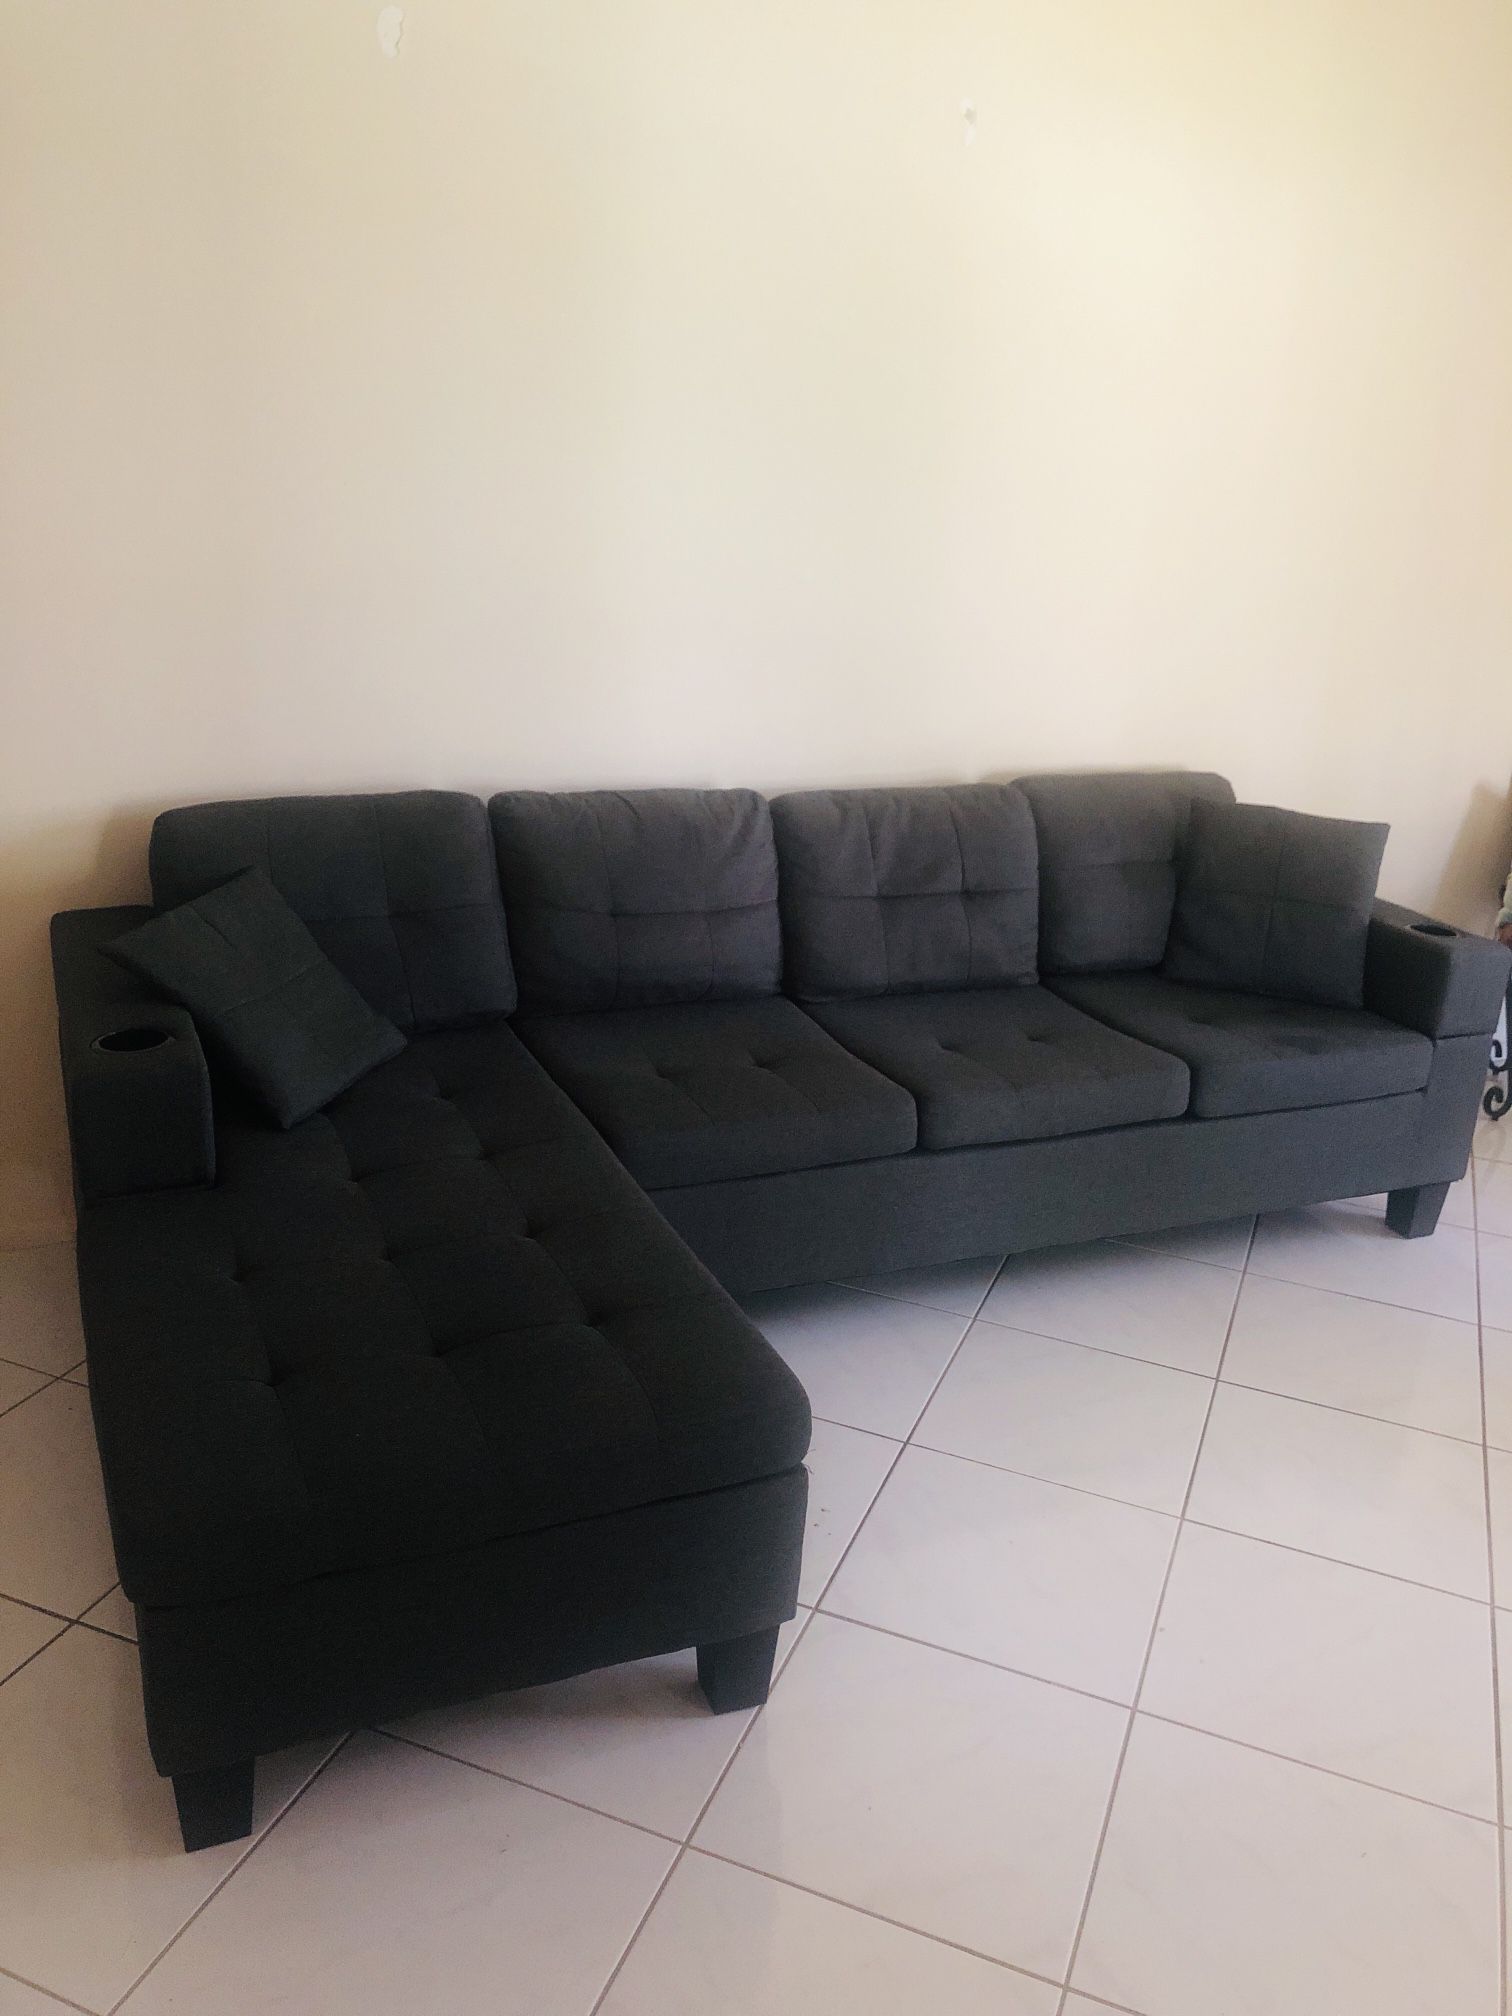 Moving Must Sell Today! Couch Like New